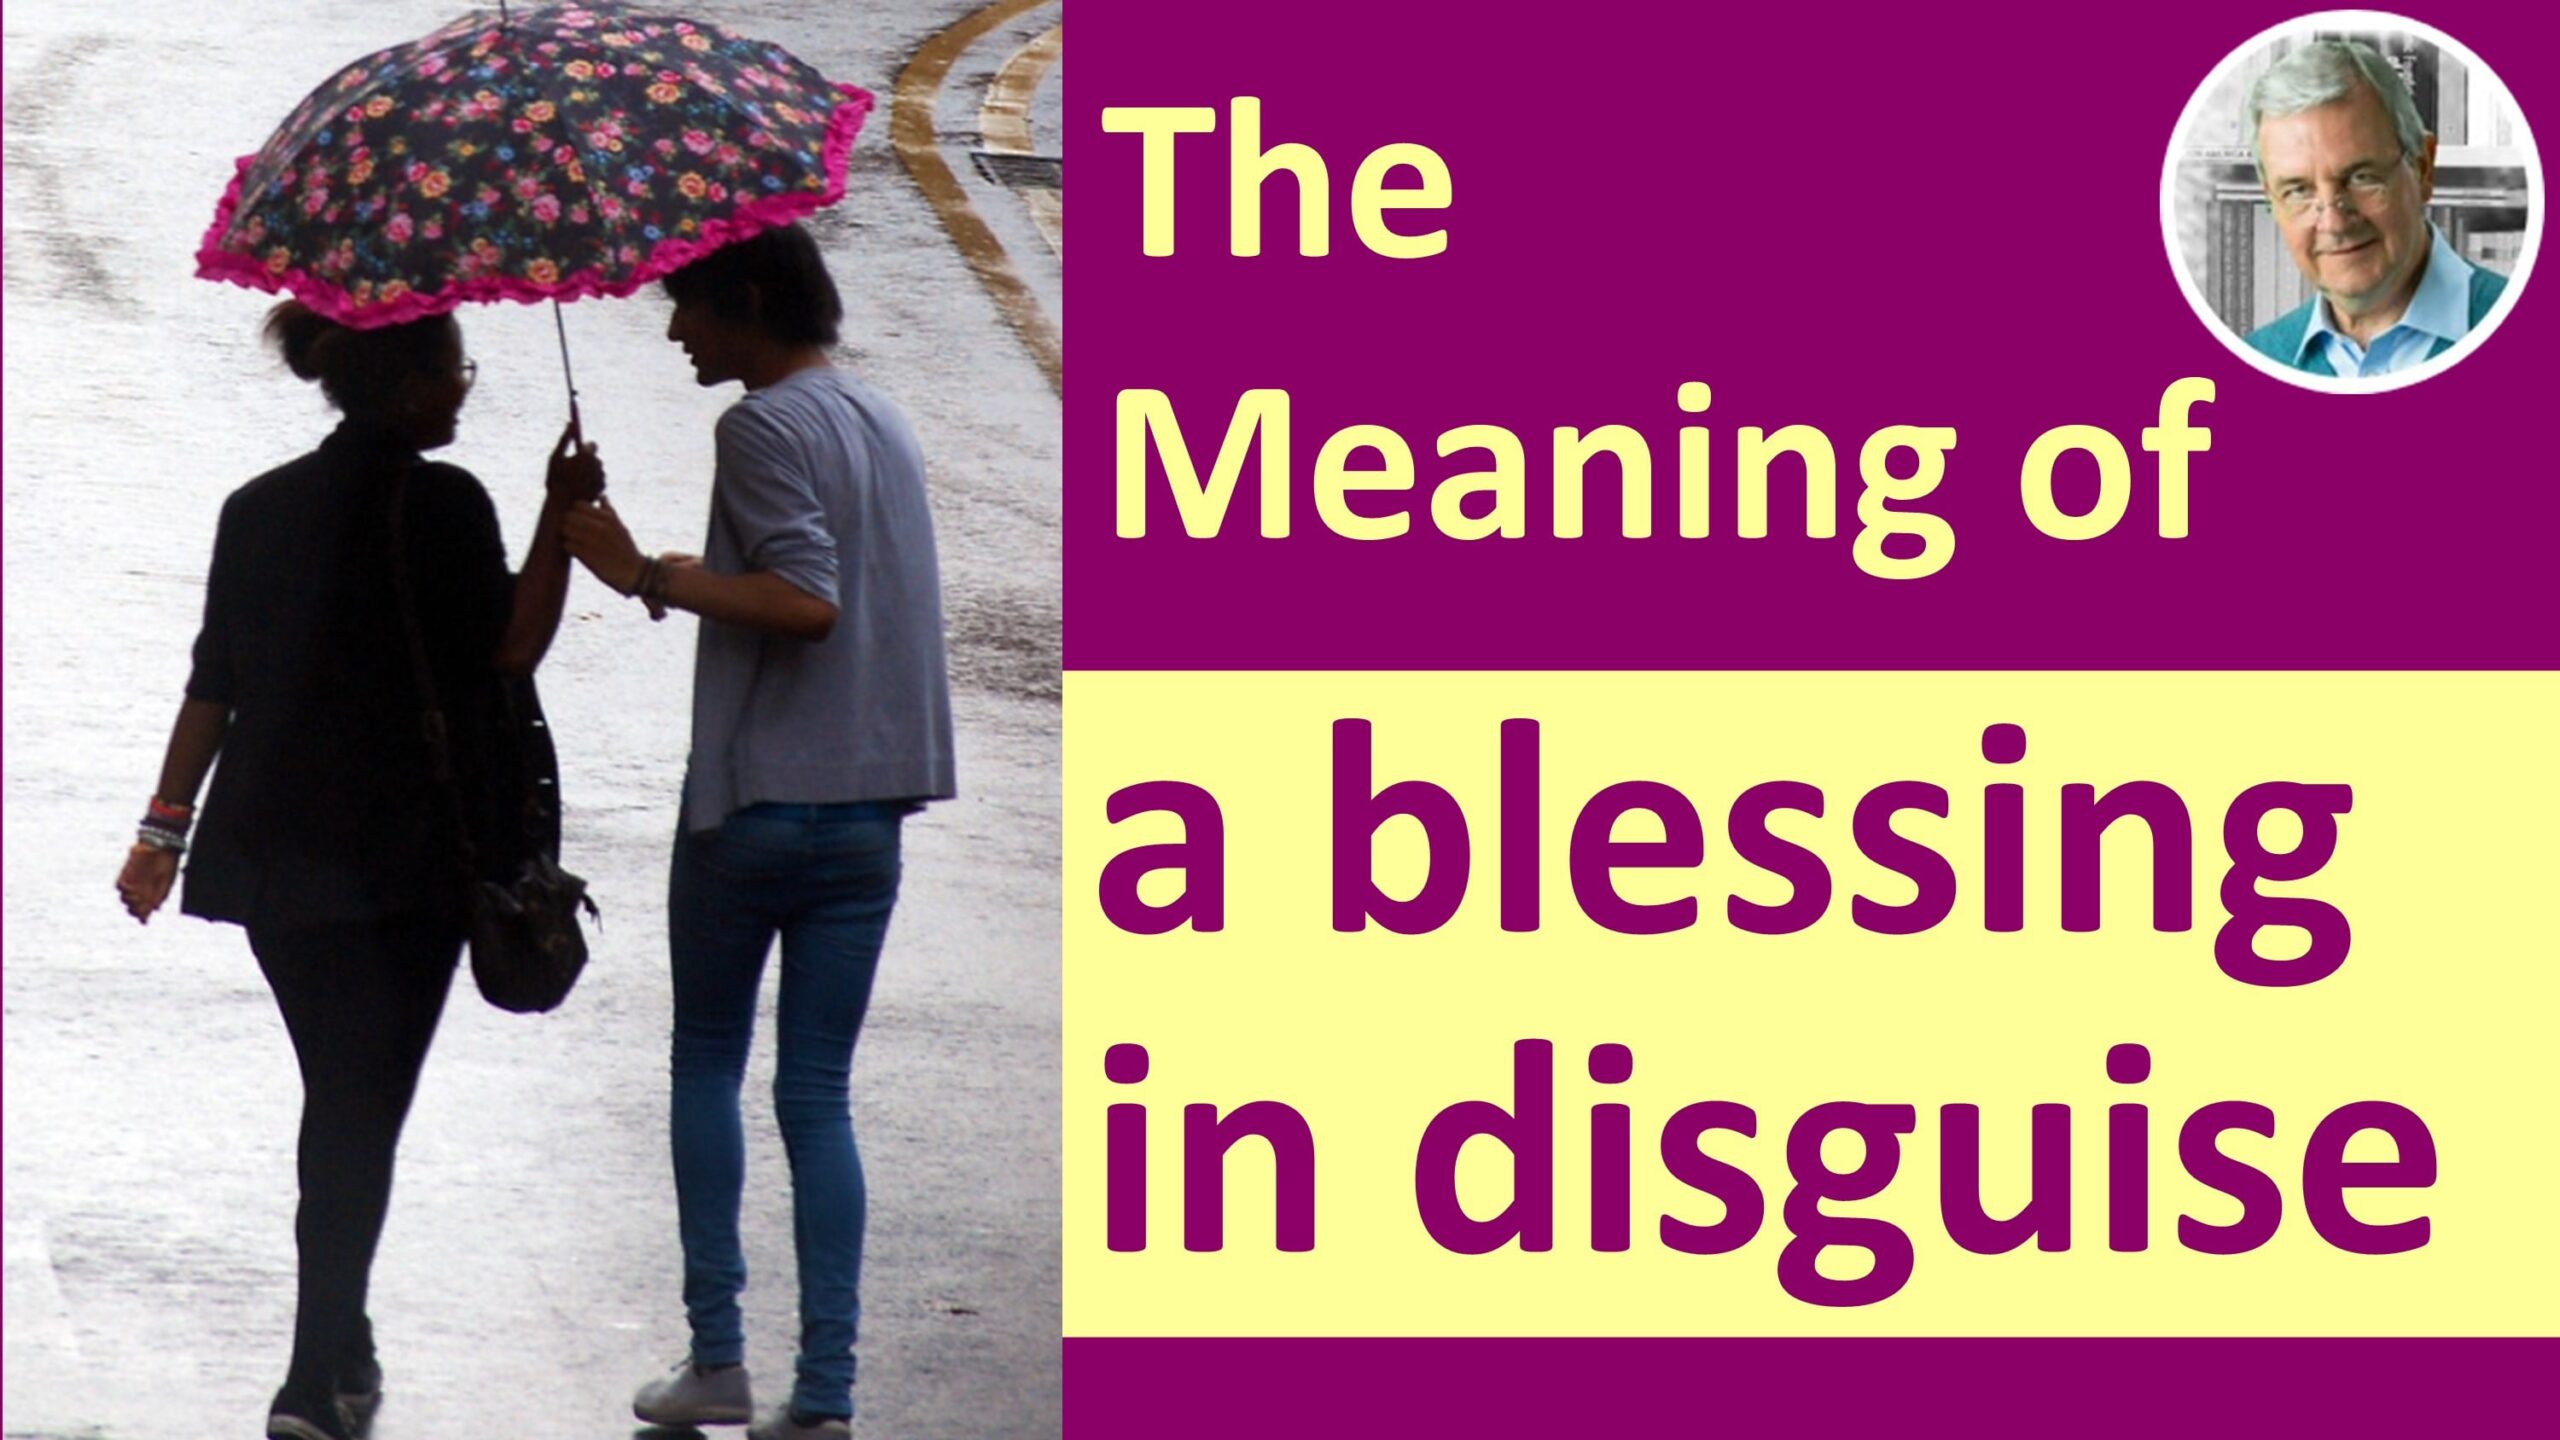 a blessing in disguise idiom meaning